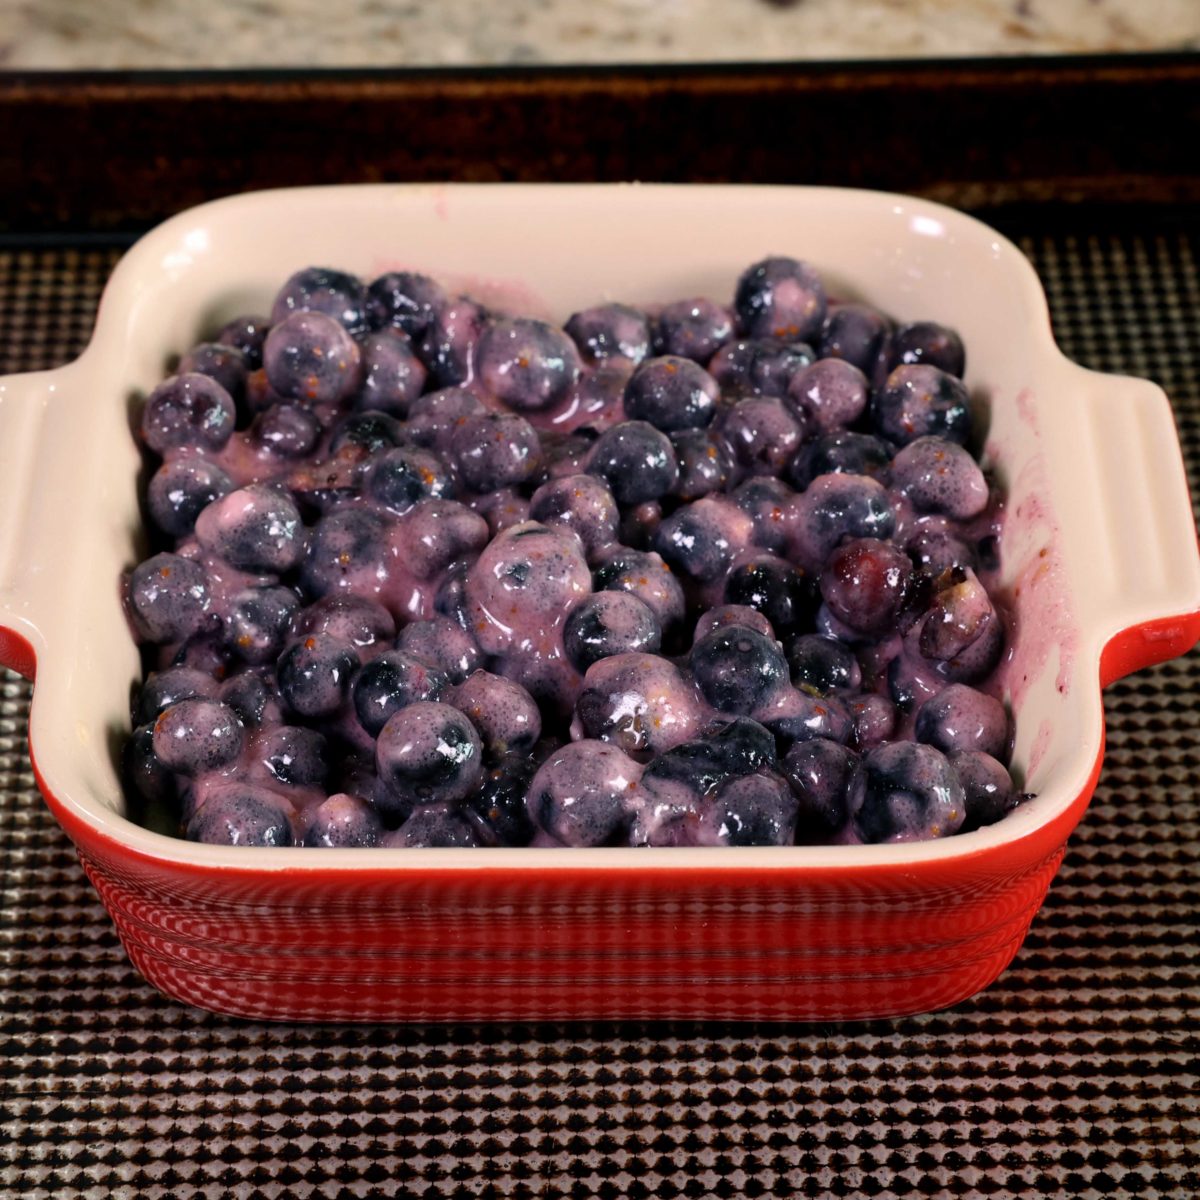 blueberries tossed with flour and juice on top of a pie crust in a red baking dish.